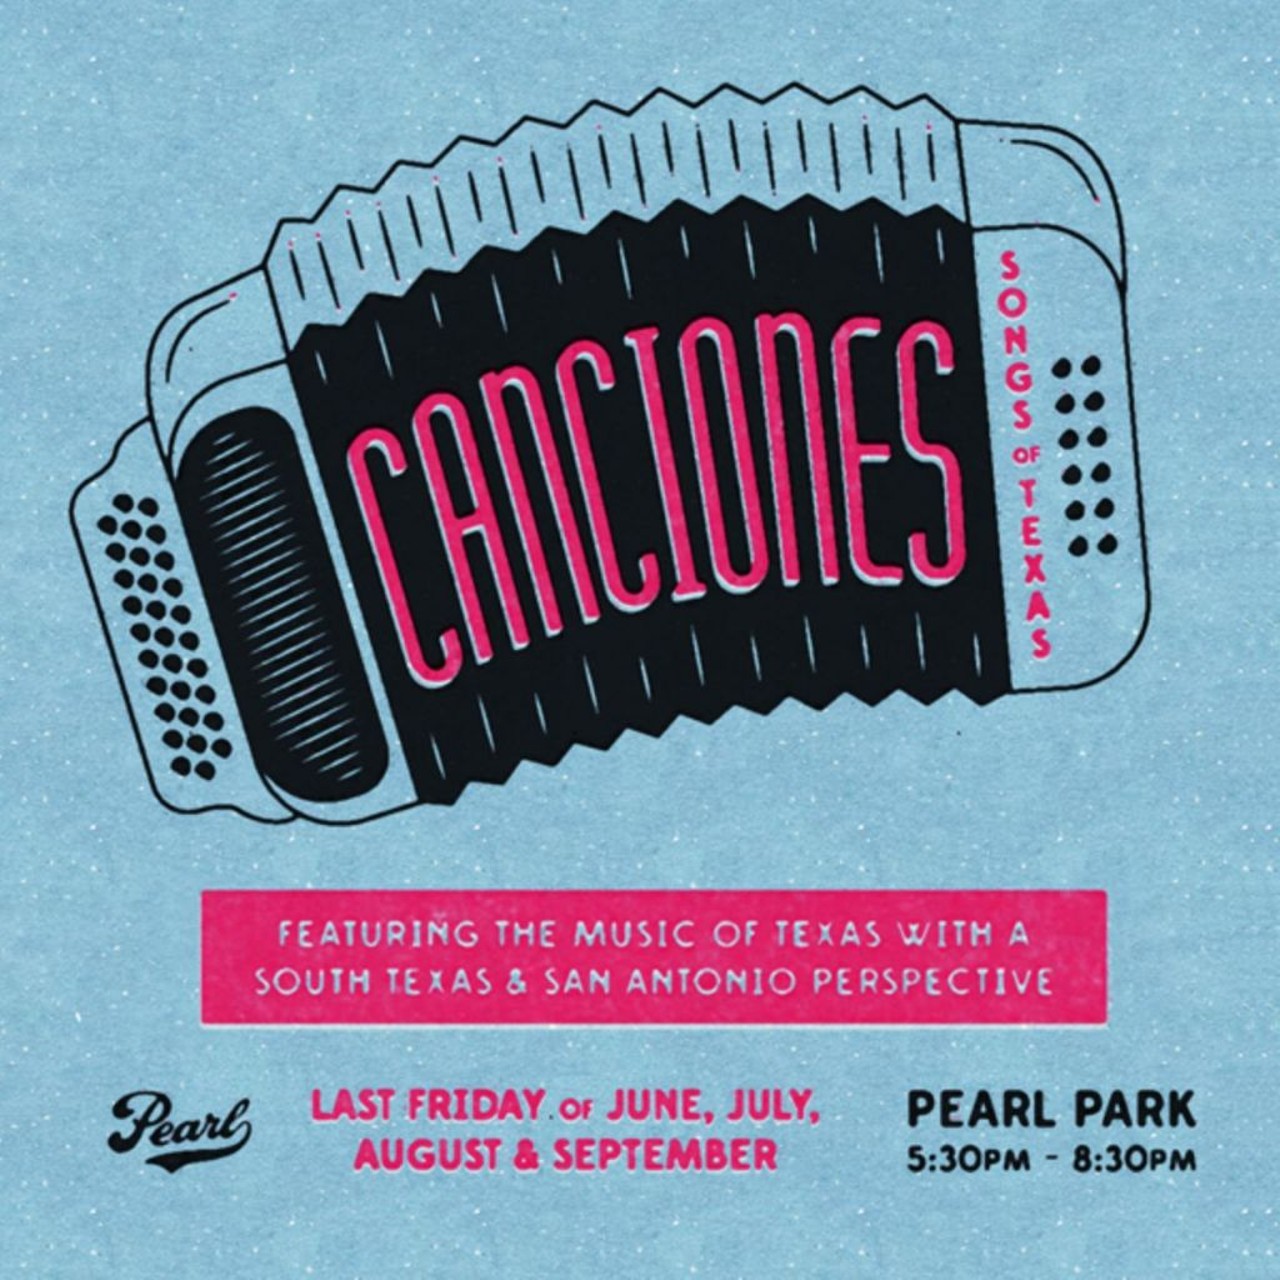 Canciones: Songs of Texas 
Fri., Sept. 1, 5:30-8:30 p.m., Pearl Park, 303 Pearl Pkwy